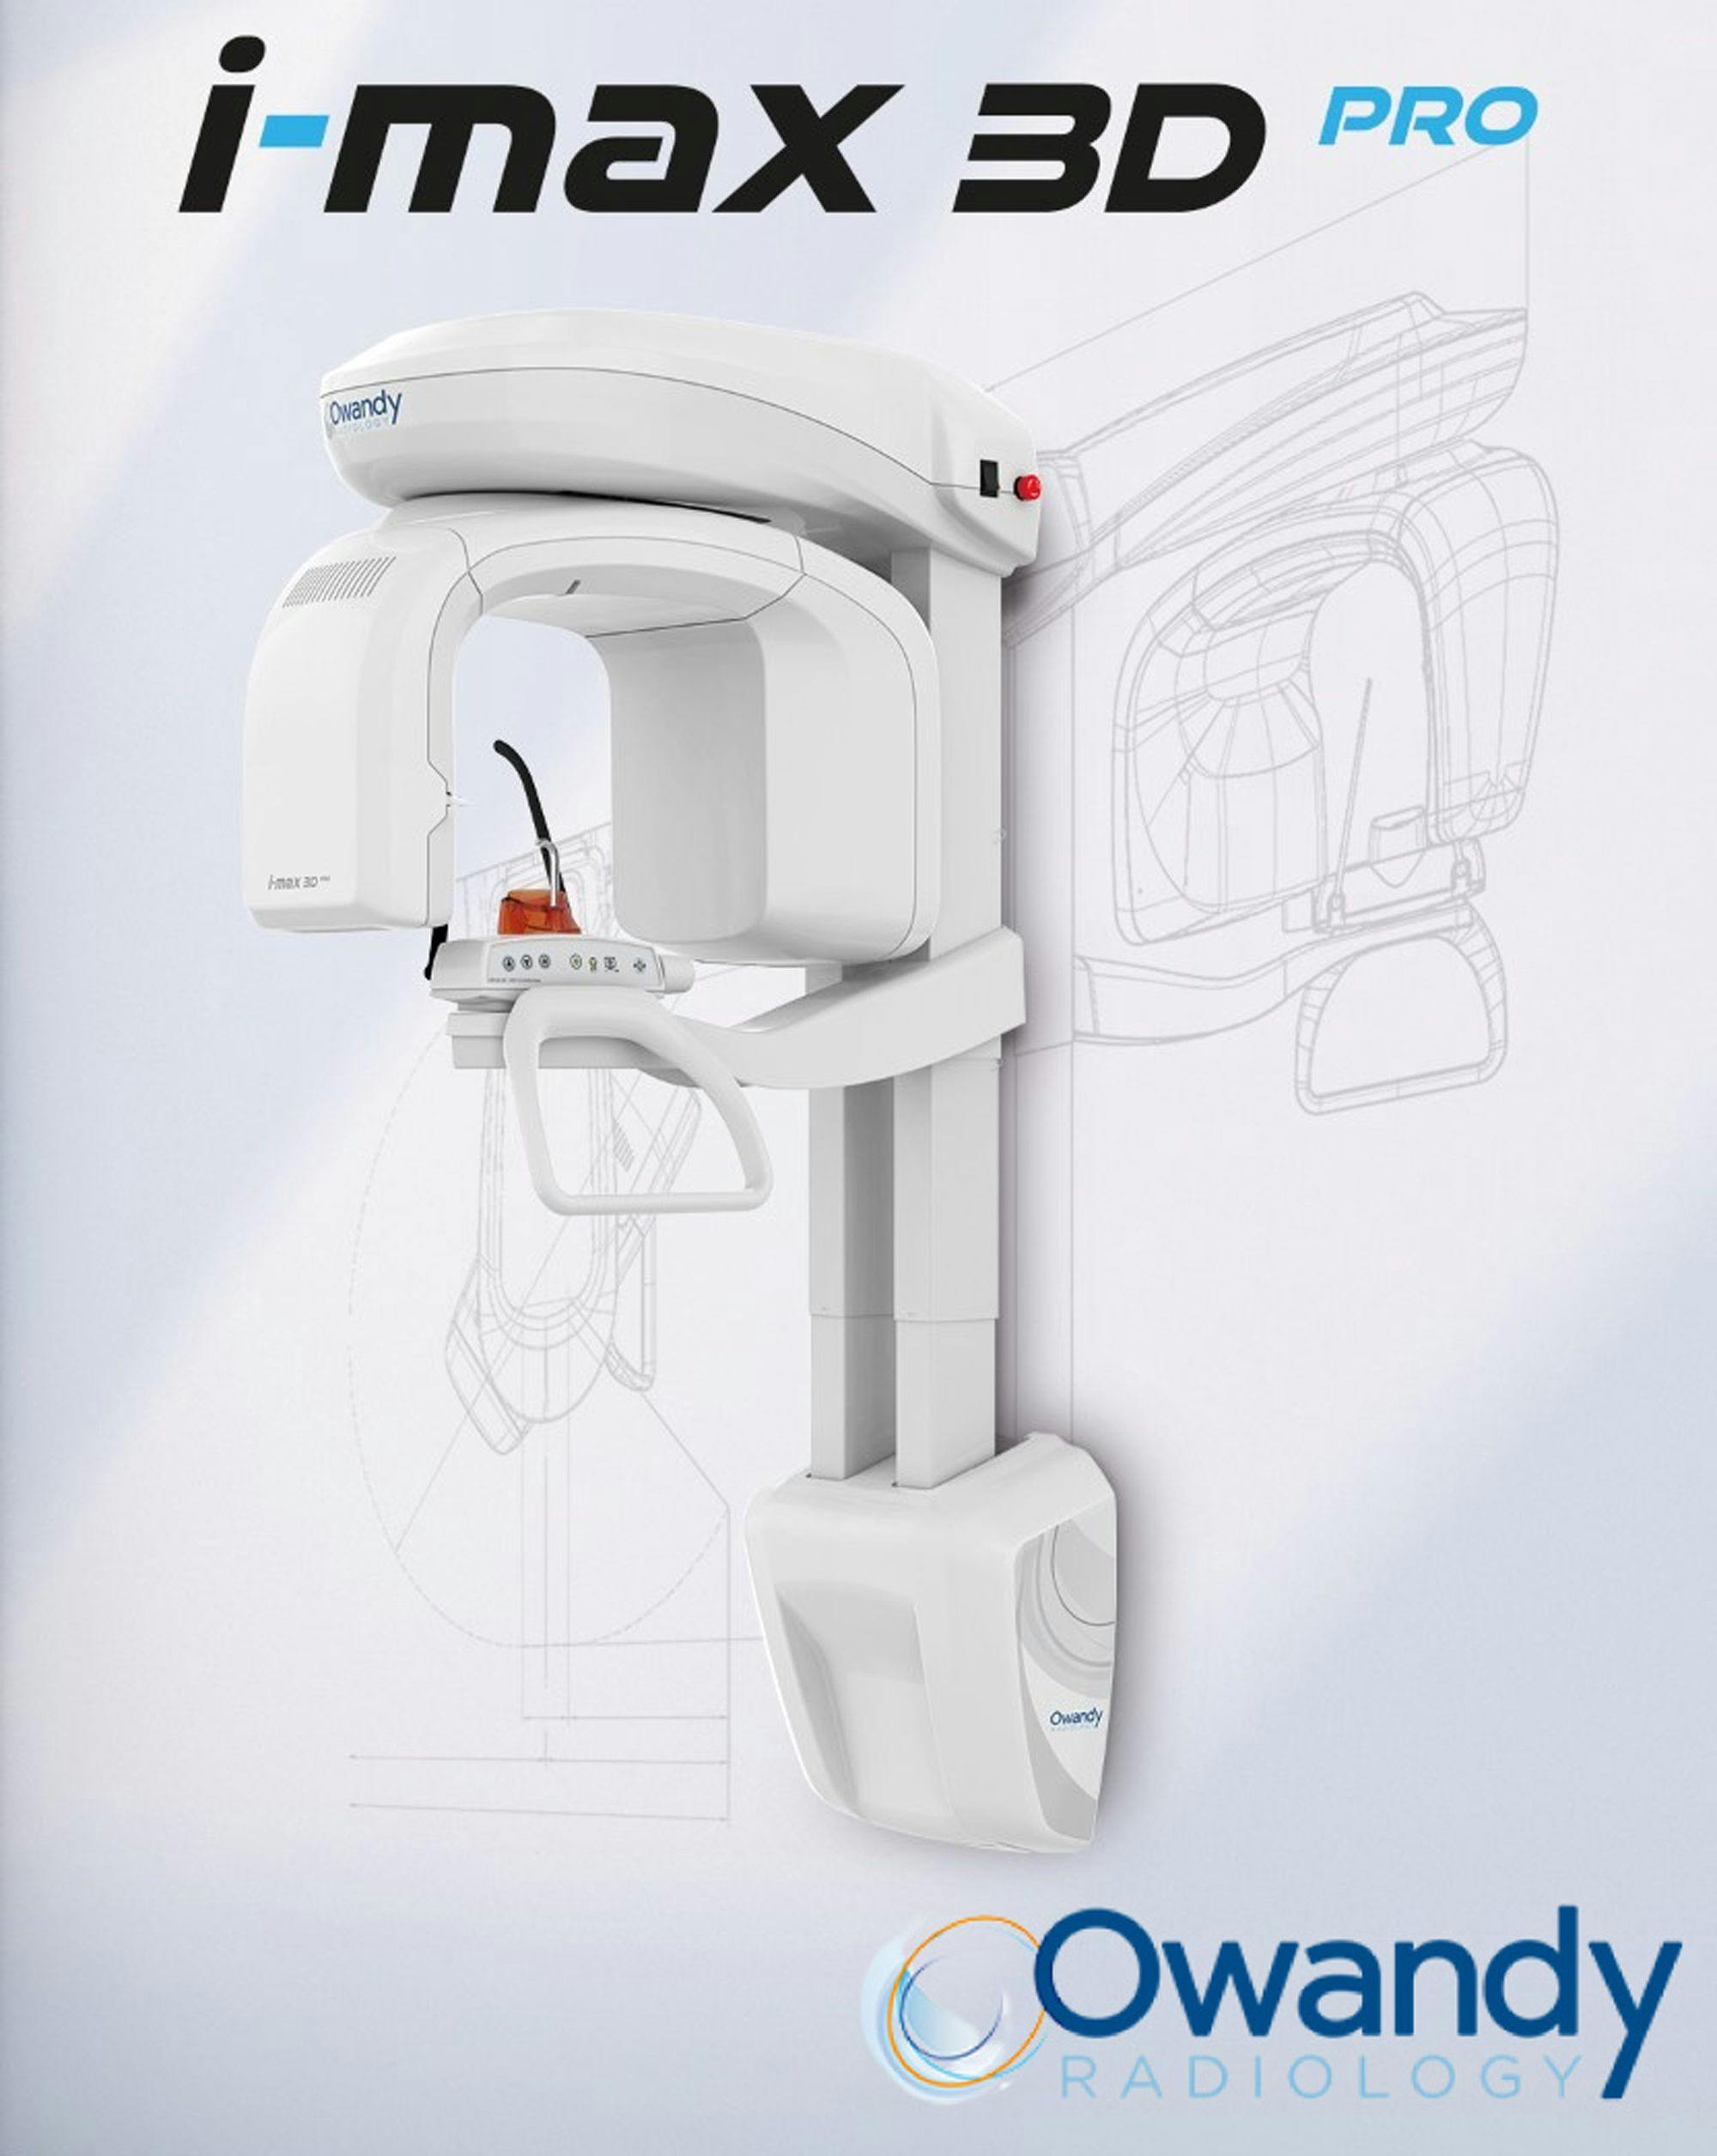 The I-Max 3D PRO CBCT from Owandy. Image: © Owandy Radiology. 